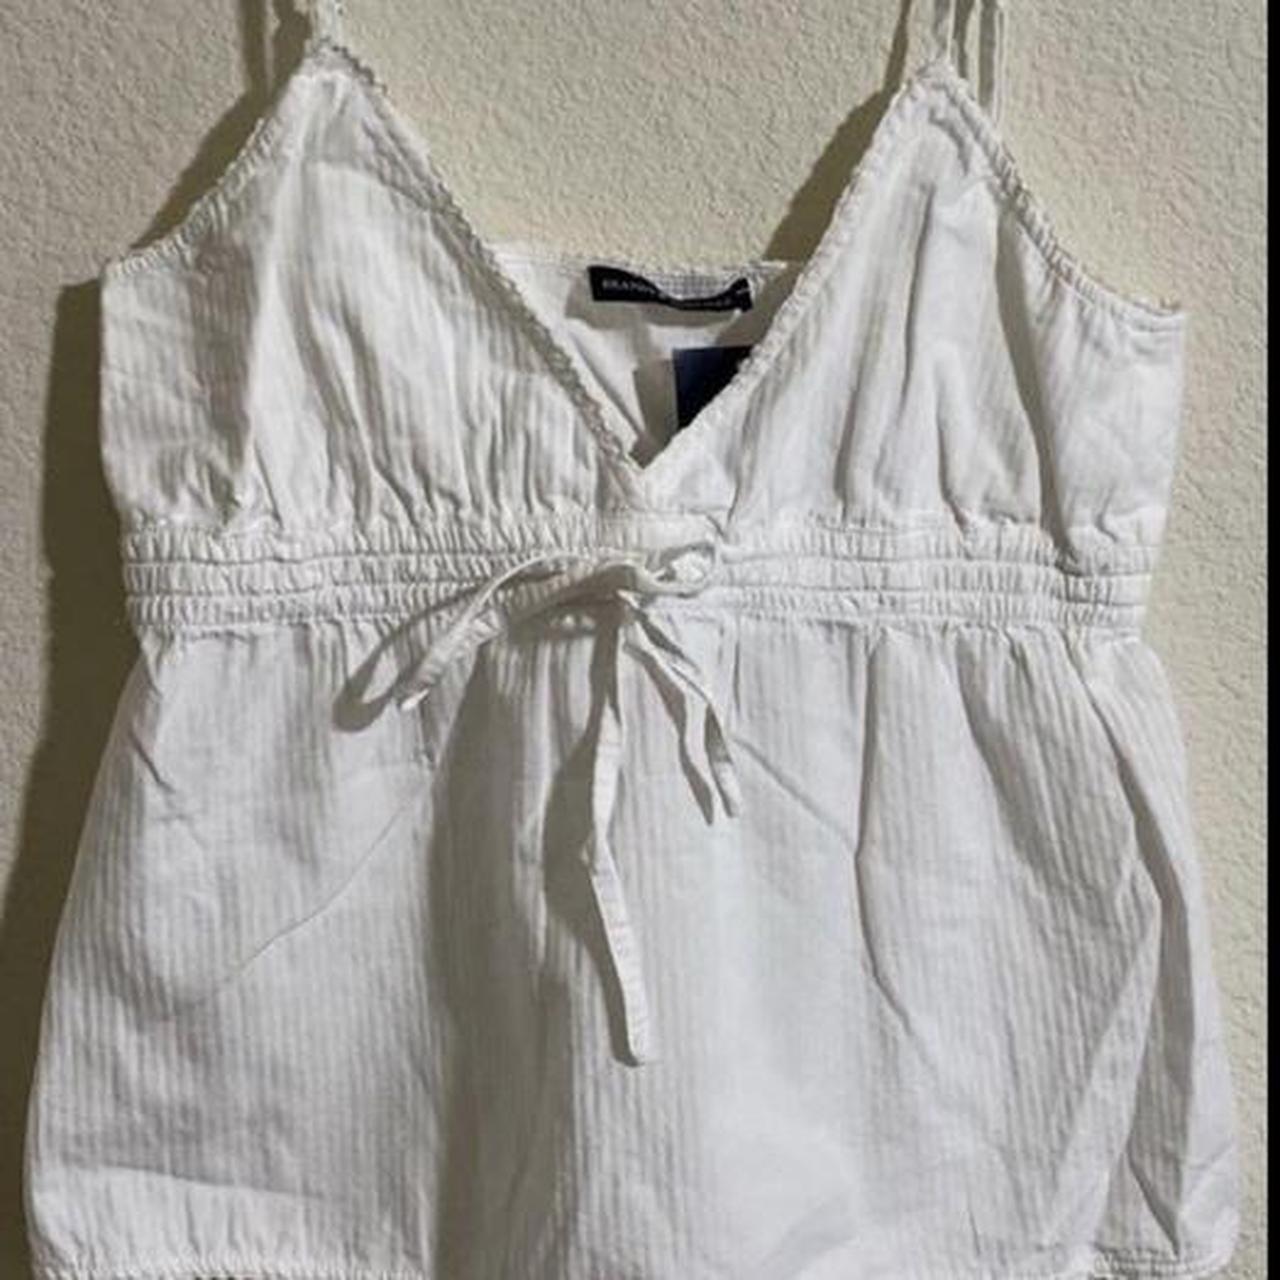 Brandy Melville Edith Tank White - $25 (16% Off Retail) - From Faith